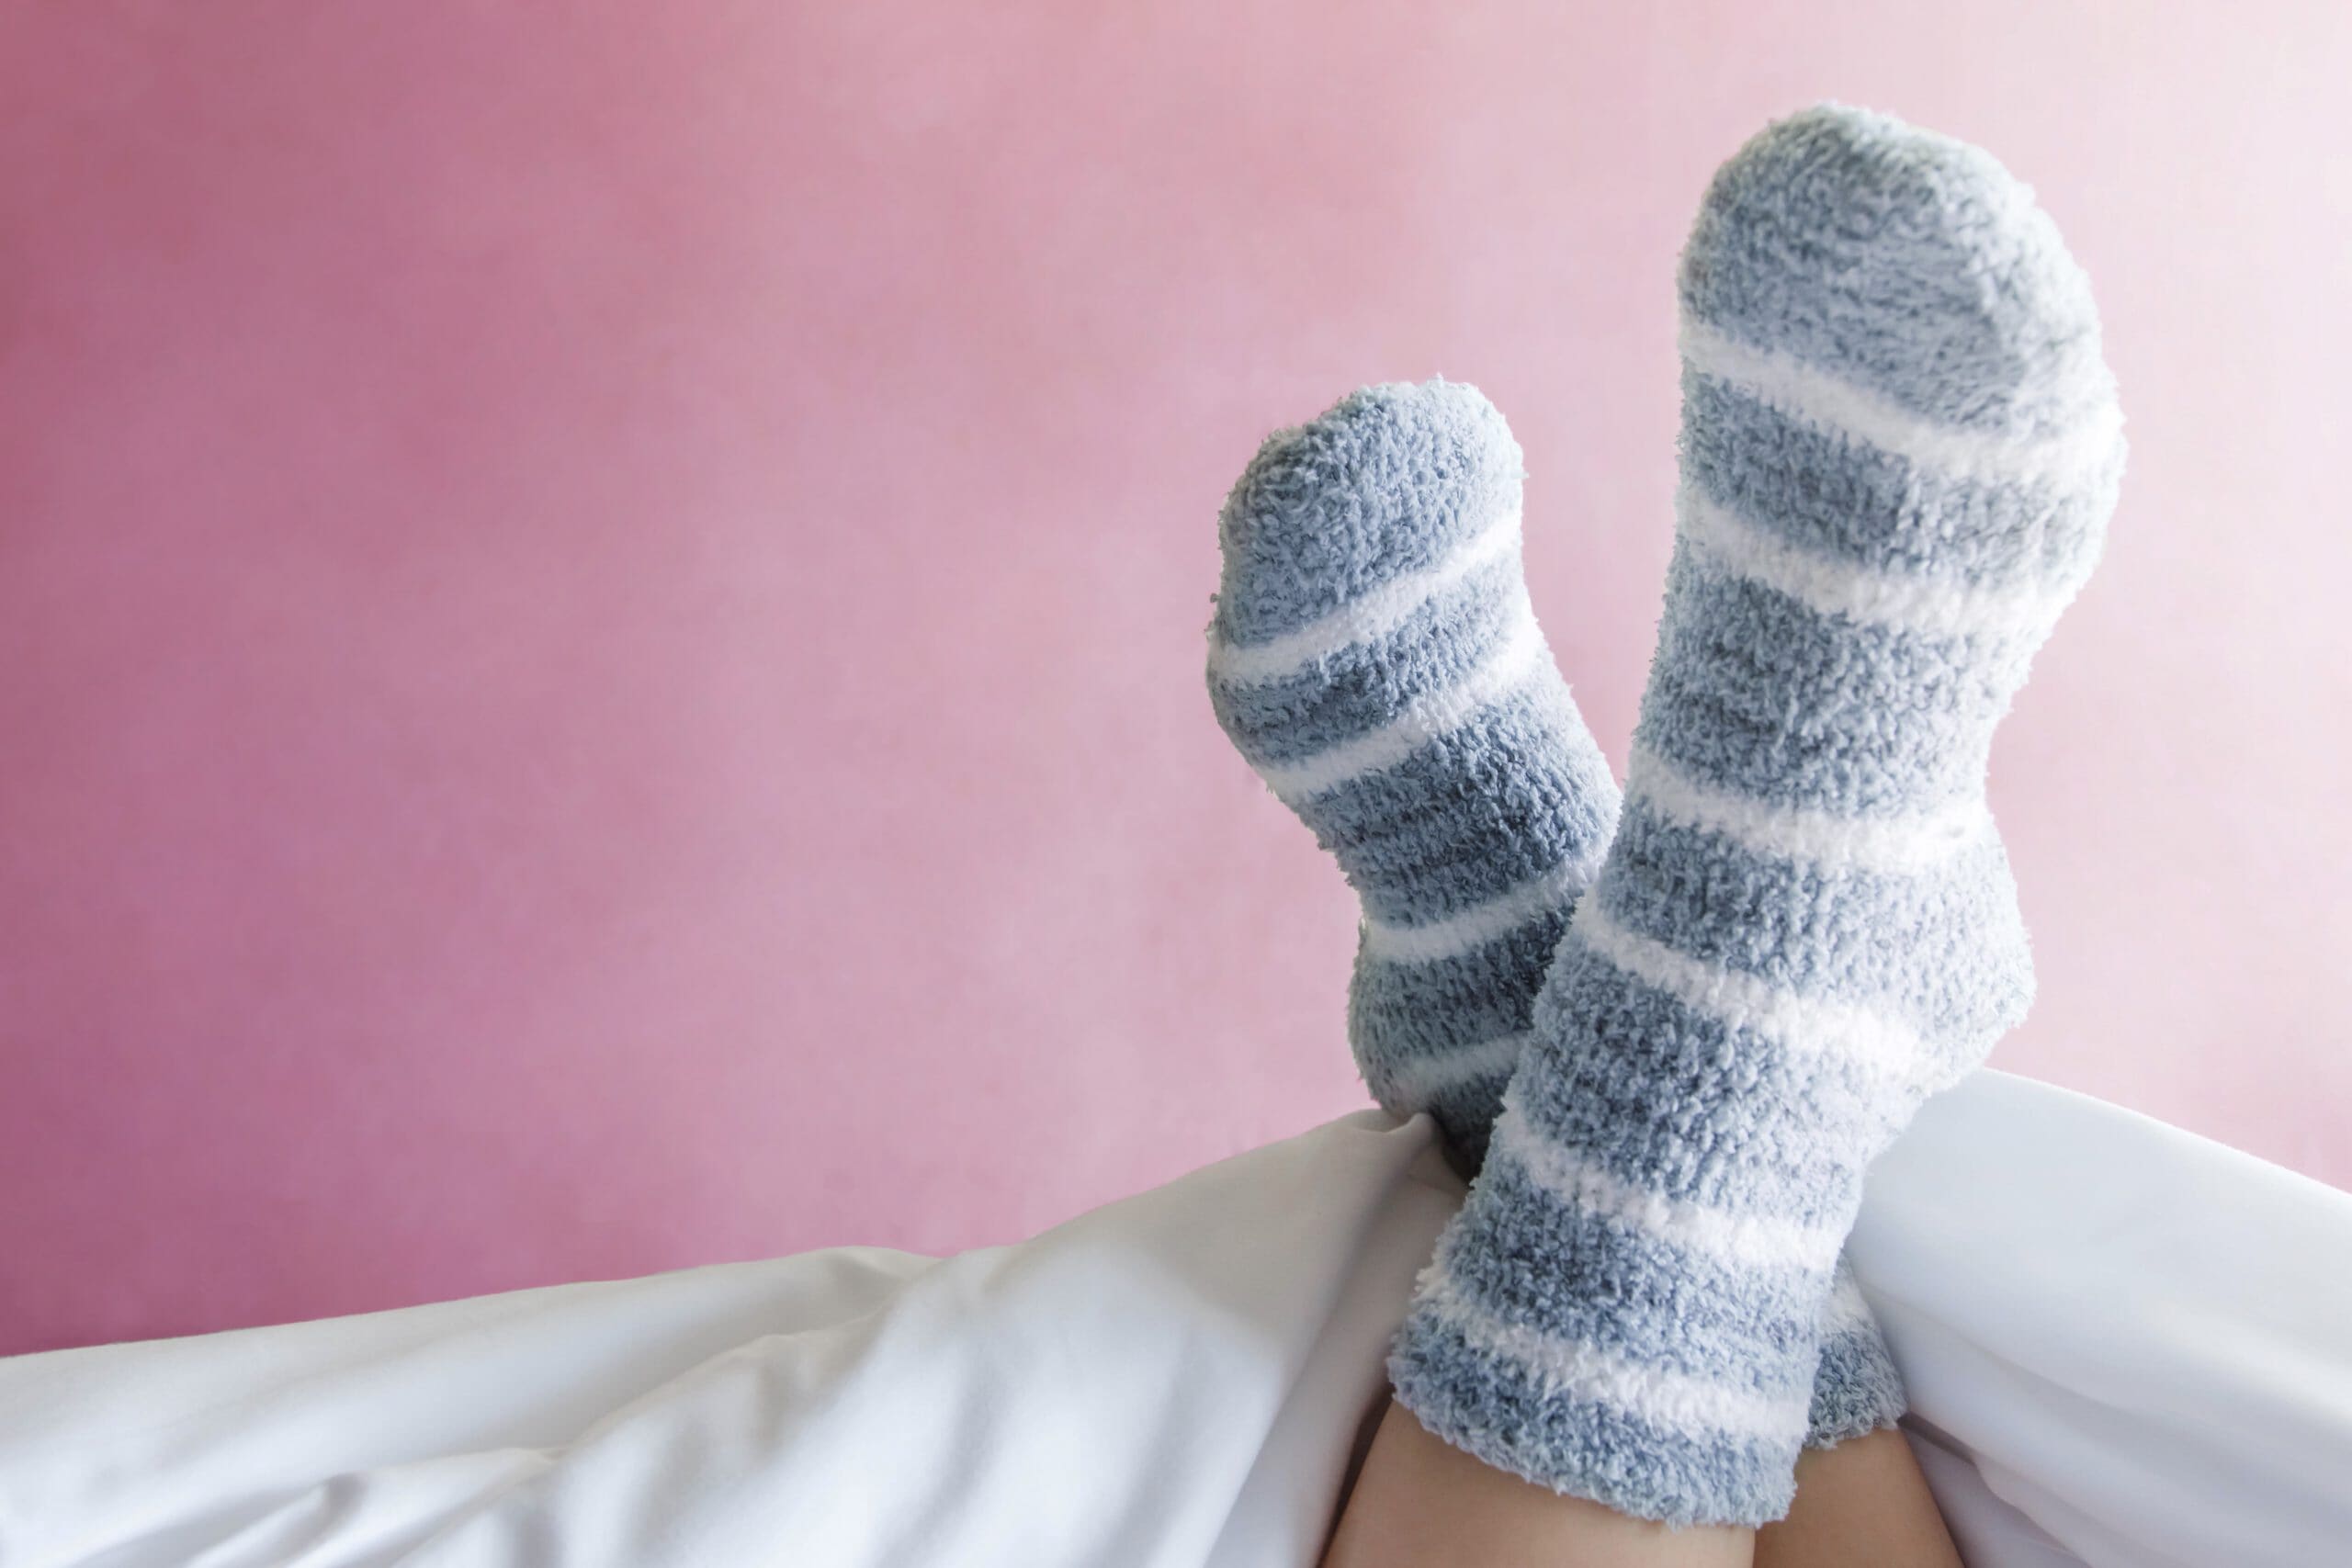 Why Do Socks Help Us Stay Warm, Despite Covering Only A Small Area